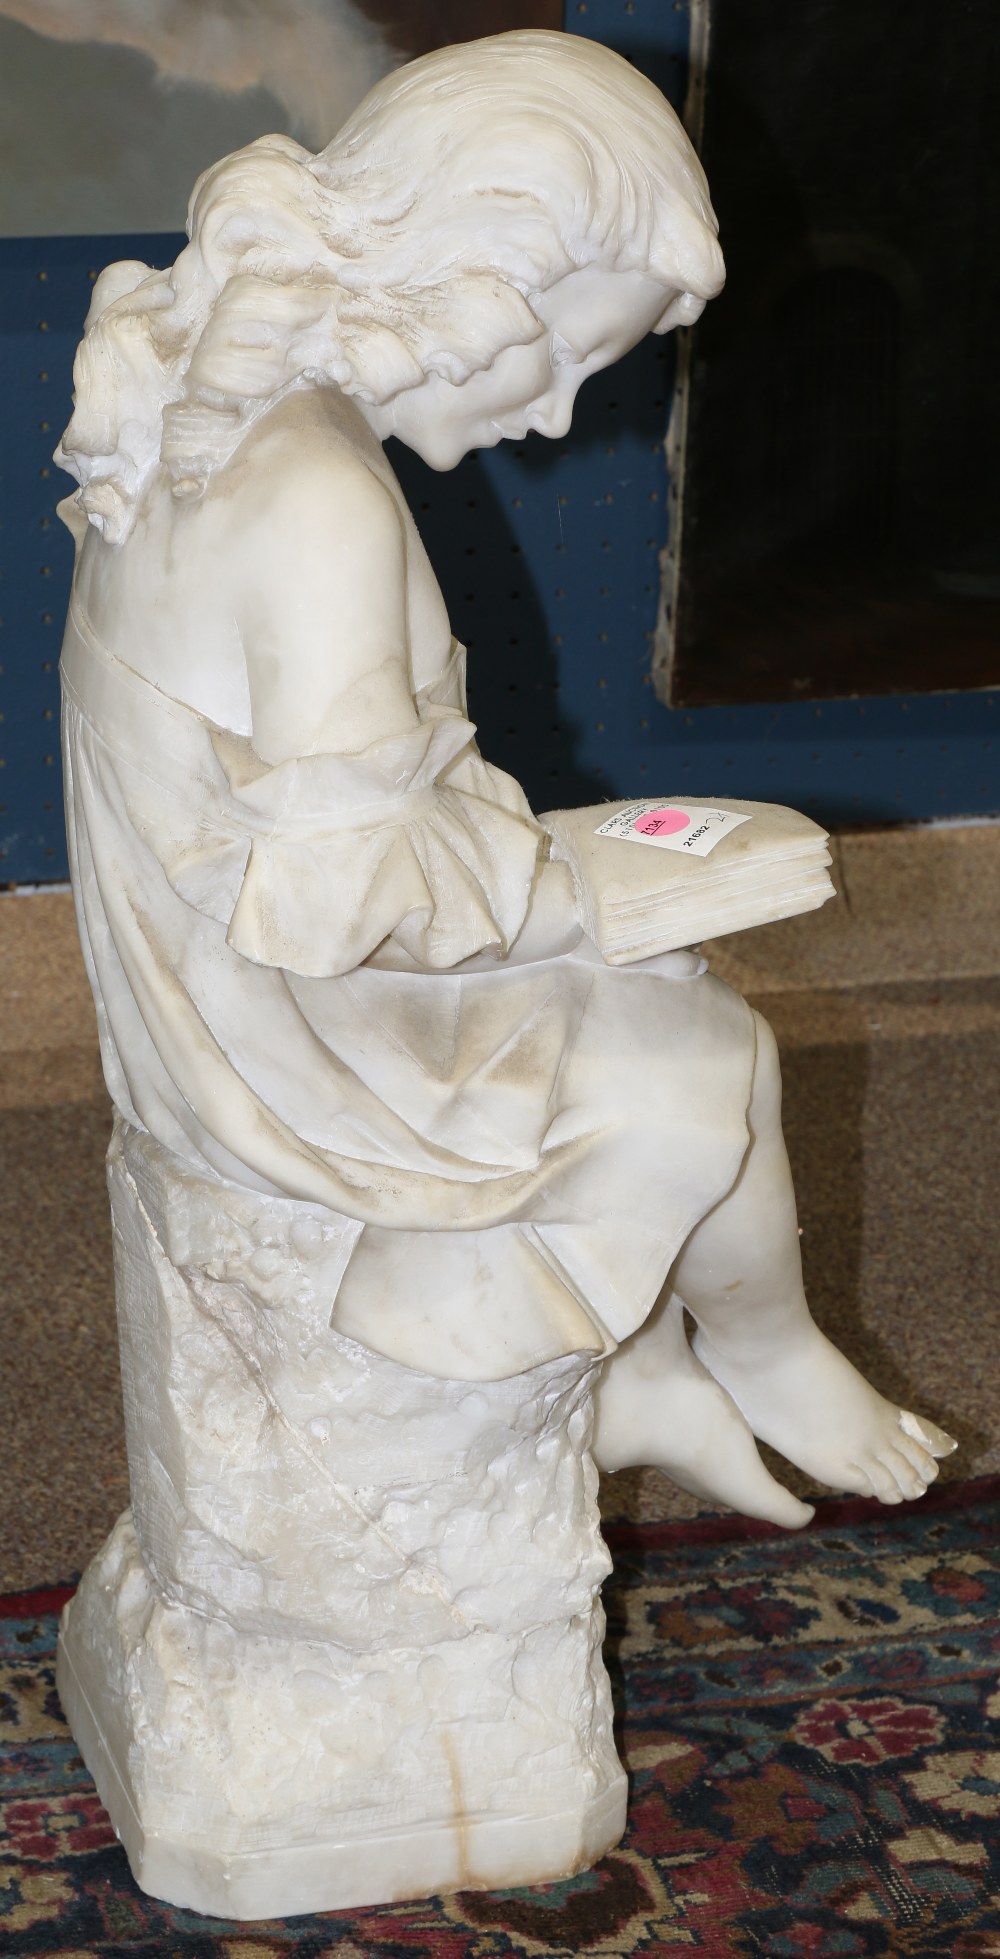 Cristofor Vicari (Italian, 1846-1913) marble figural sculpture, depicting a young girl reading, - Image 3 of 5